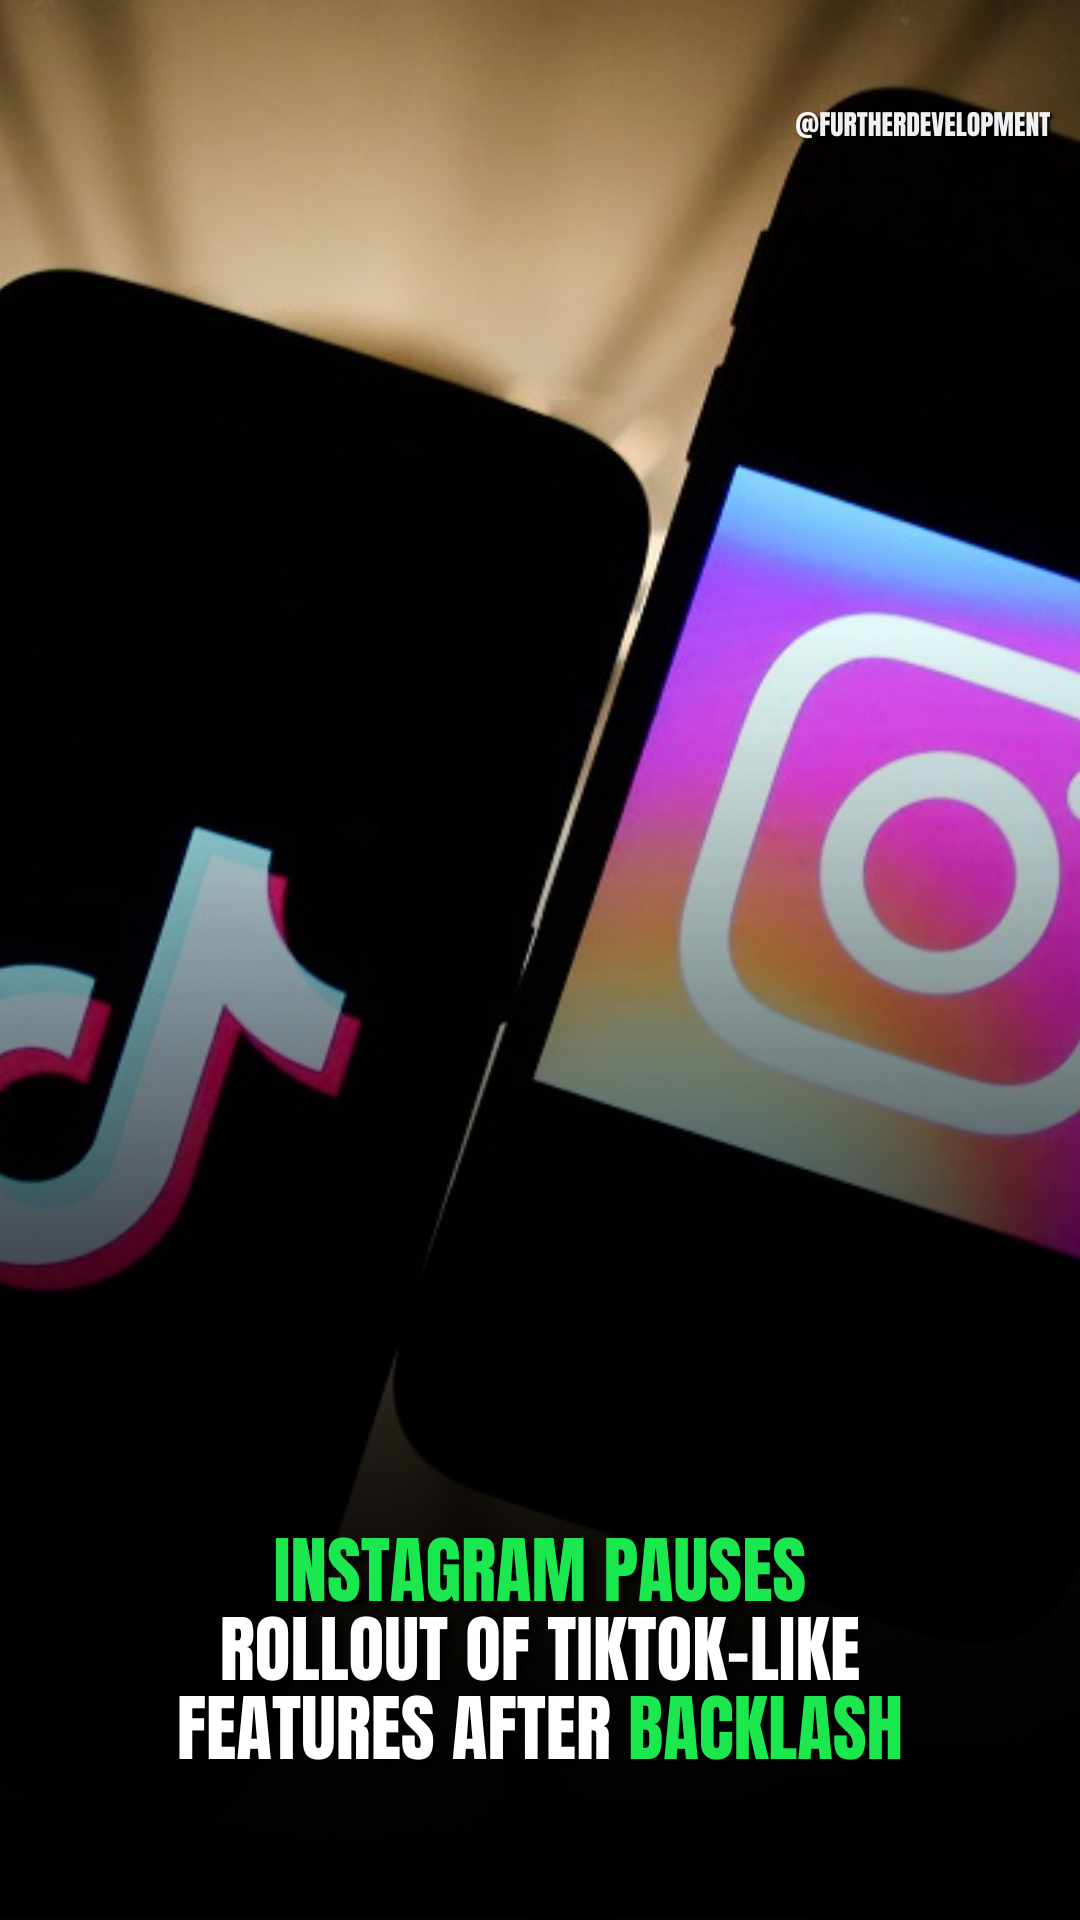 Instagram pauses rollout of TikTok-like features after backlash